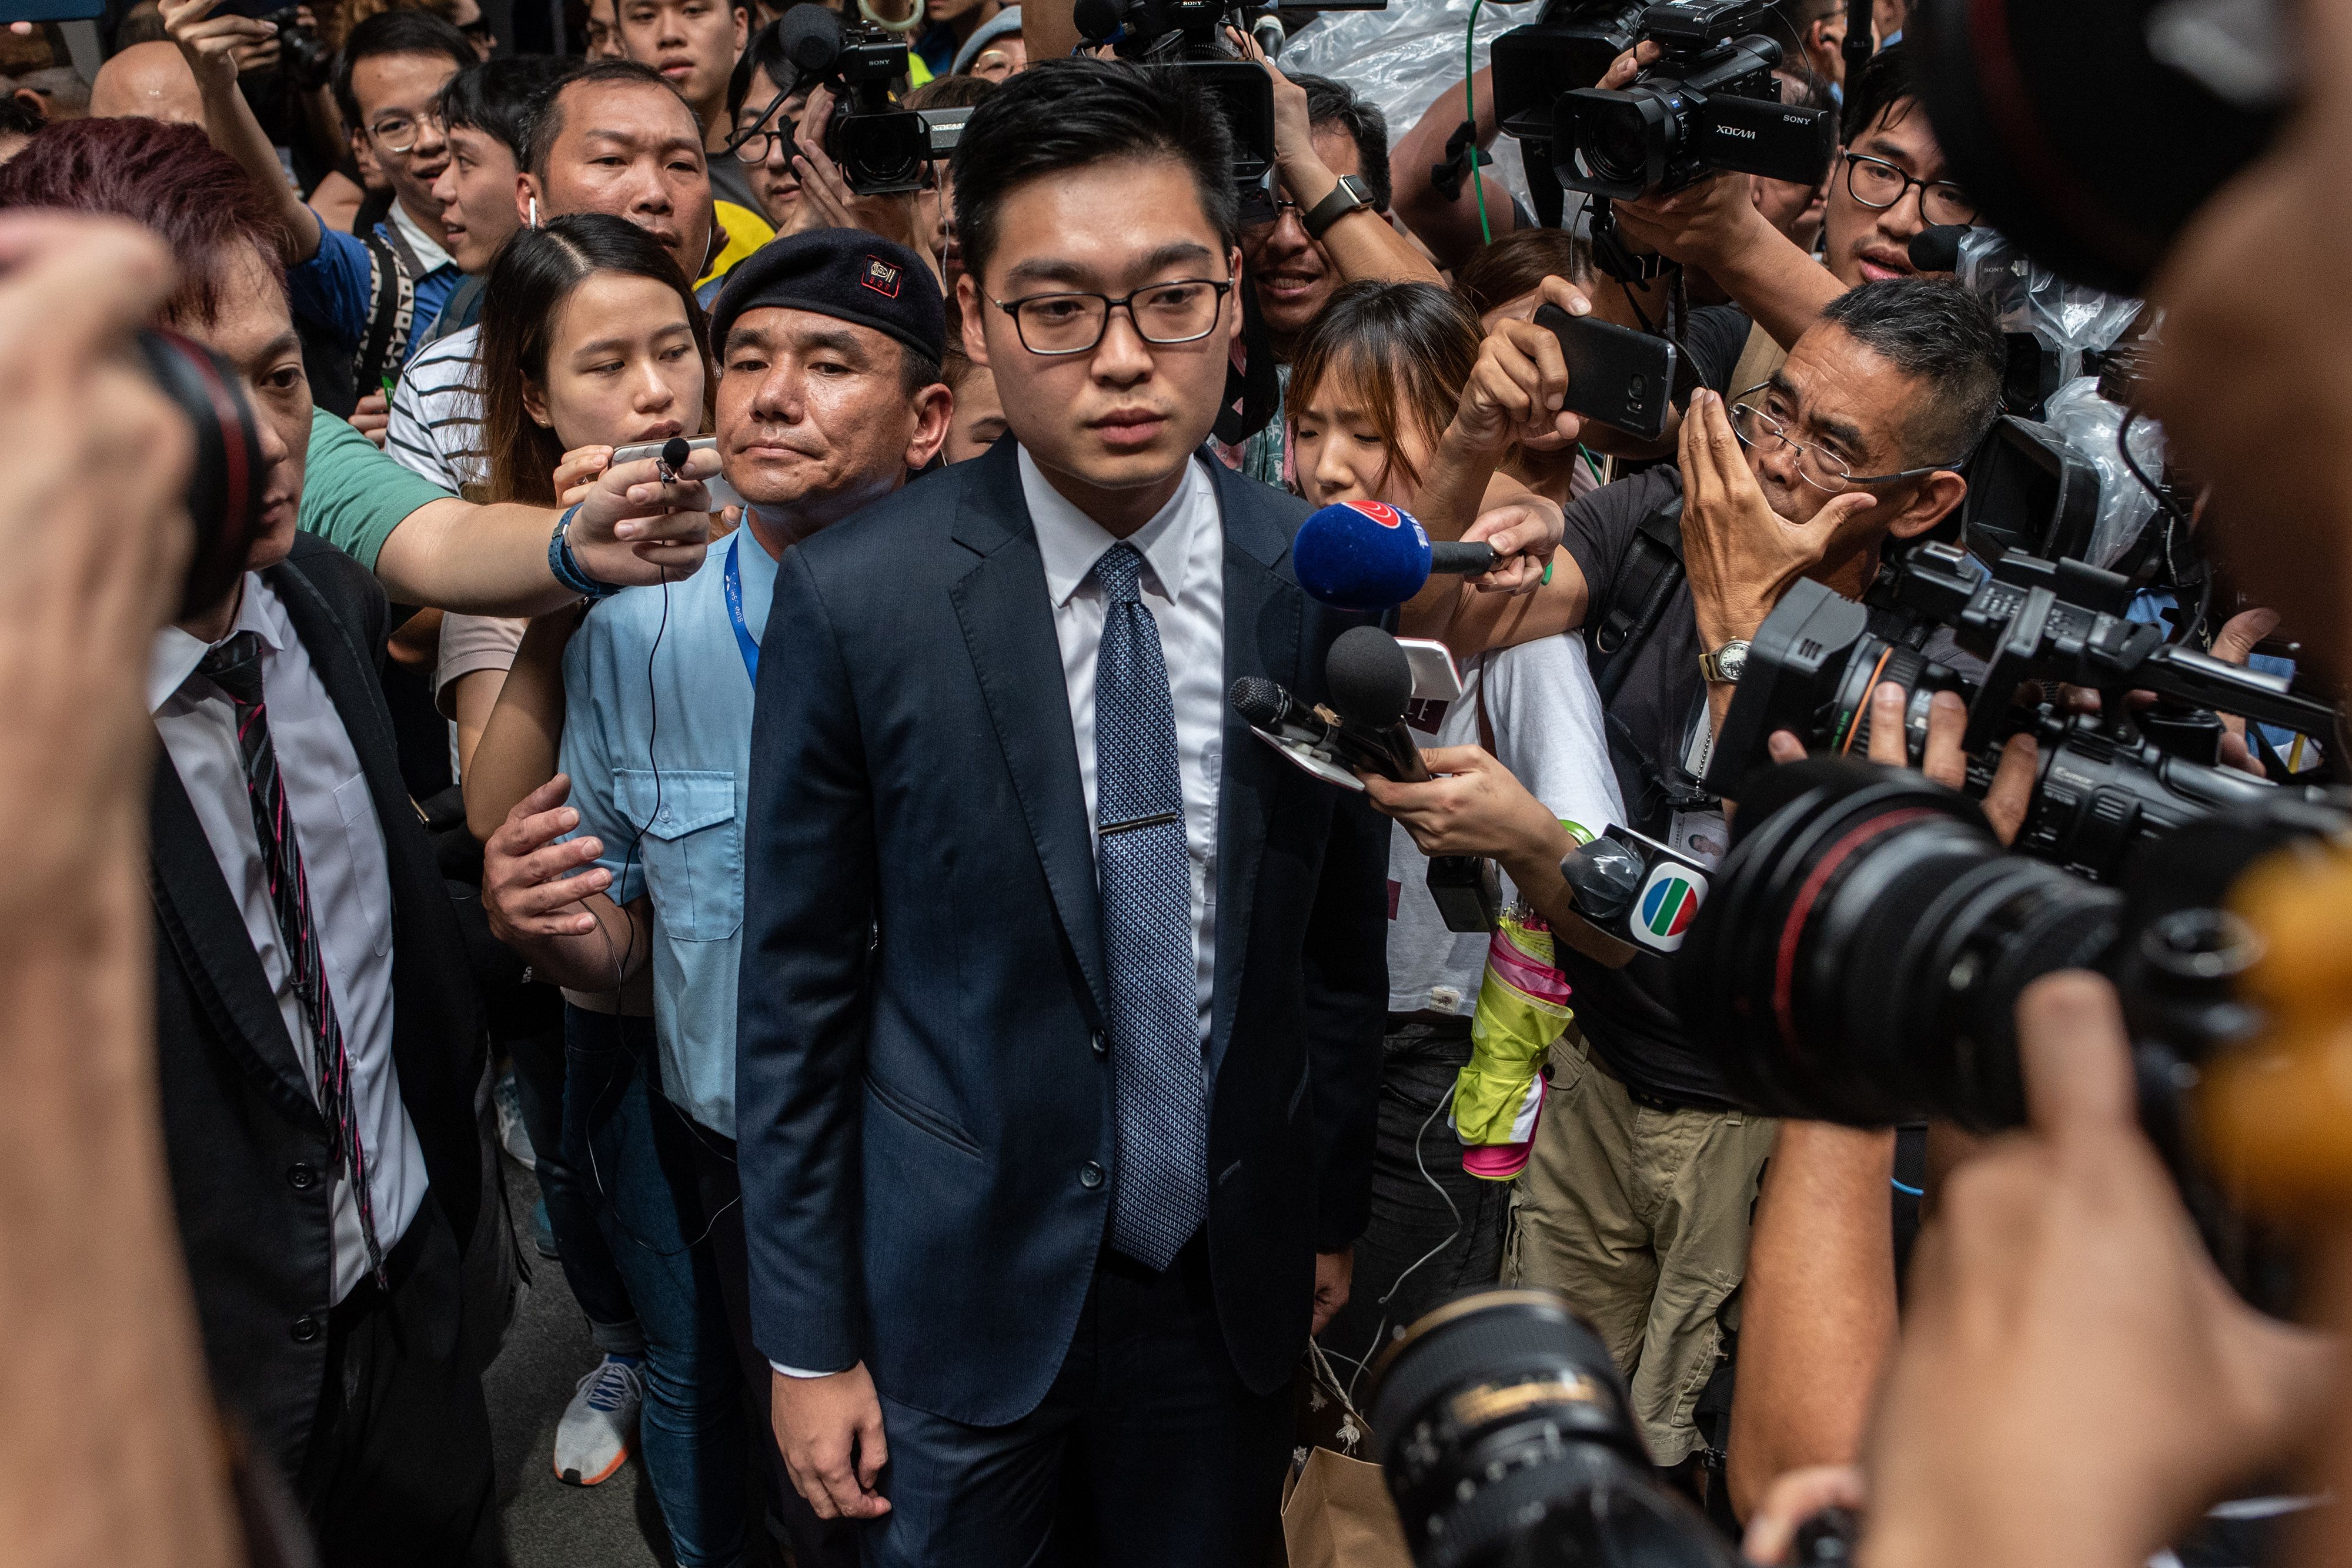 Andy Chan (C), founder of the Hong Kong National Party, is surrounded by members of the media as he leaves the Foreign Correspondents' Club in Hong Kong on Aug. 14, 2018. (Philip Fong—AFP/Getty Images)